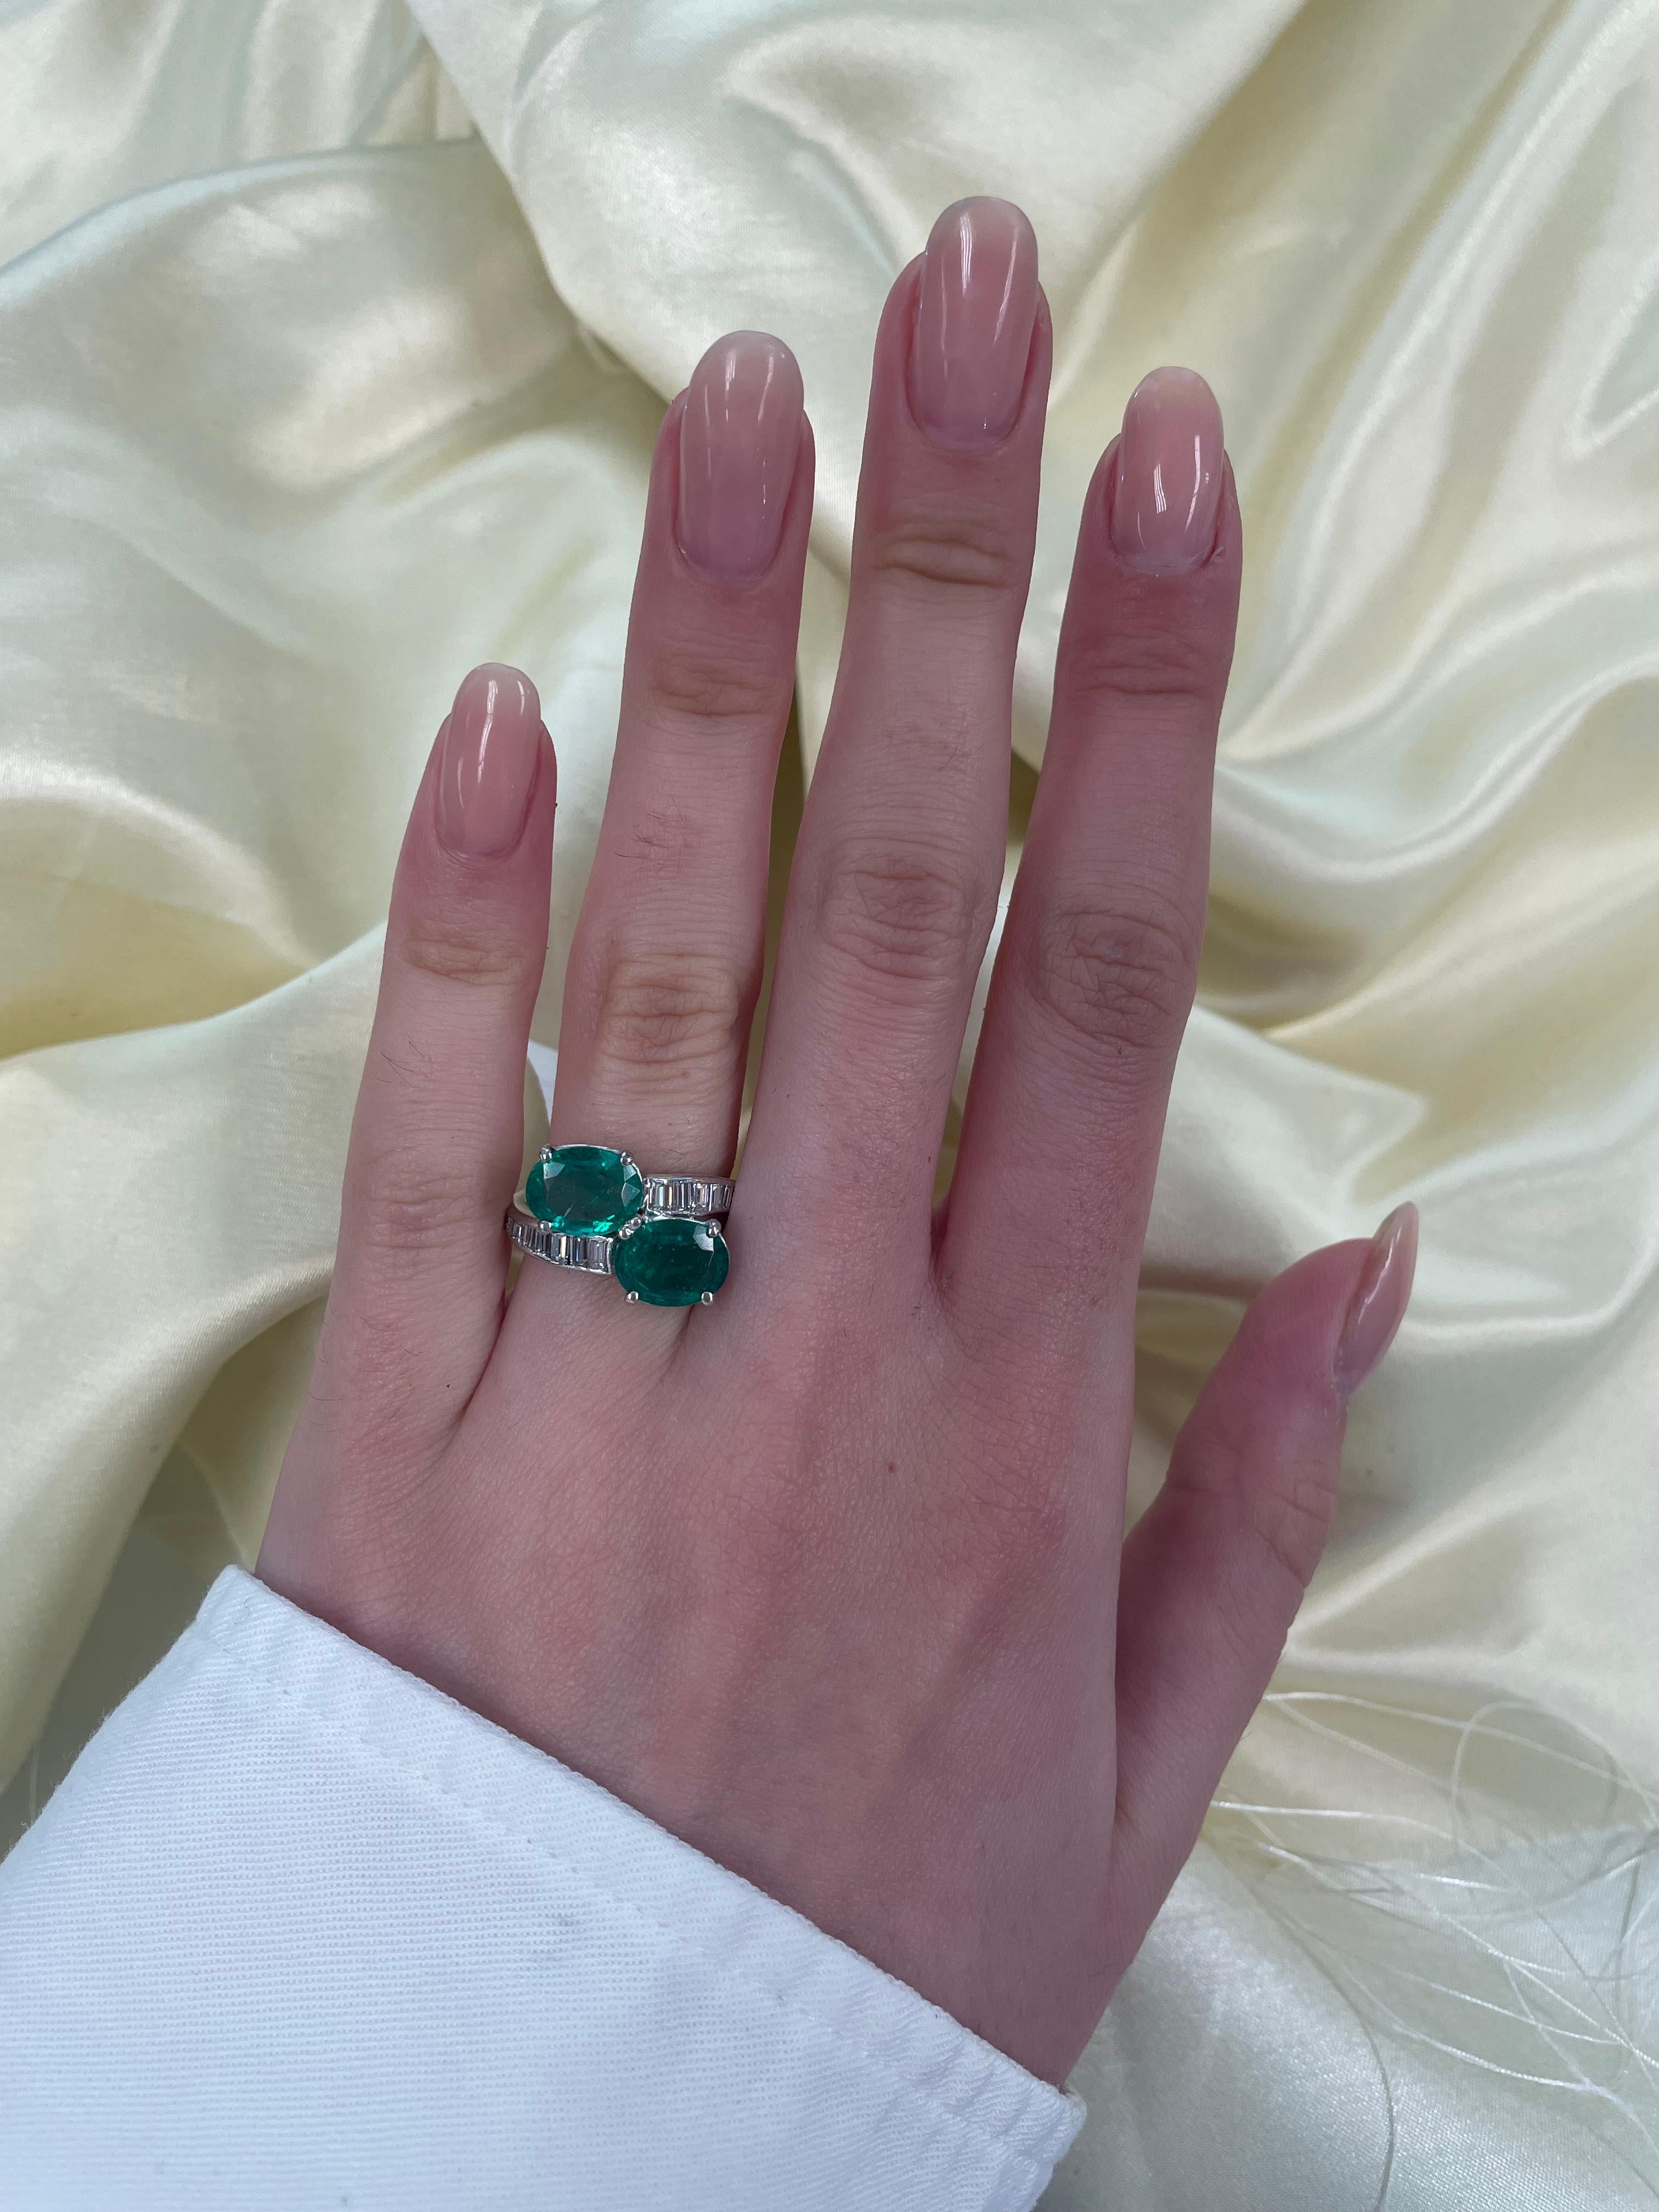 Beautiful vintage emerald and diamond bypass ring.
3.40 carats total diamond weight.
2 oval shape emeralds, 2.62 carats. Approximately 0.78 carats of baguette and tapered baguette cut diamonds, G/H color, VS clarity. 18-karat white gold, current